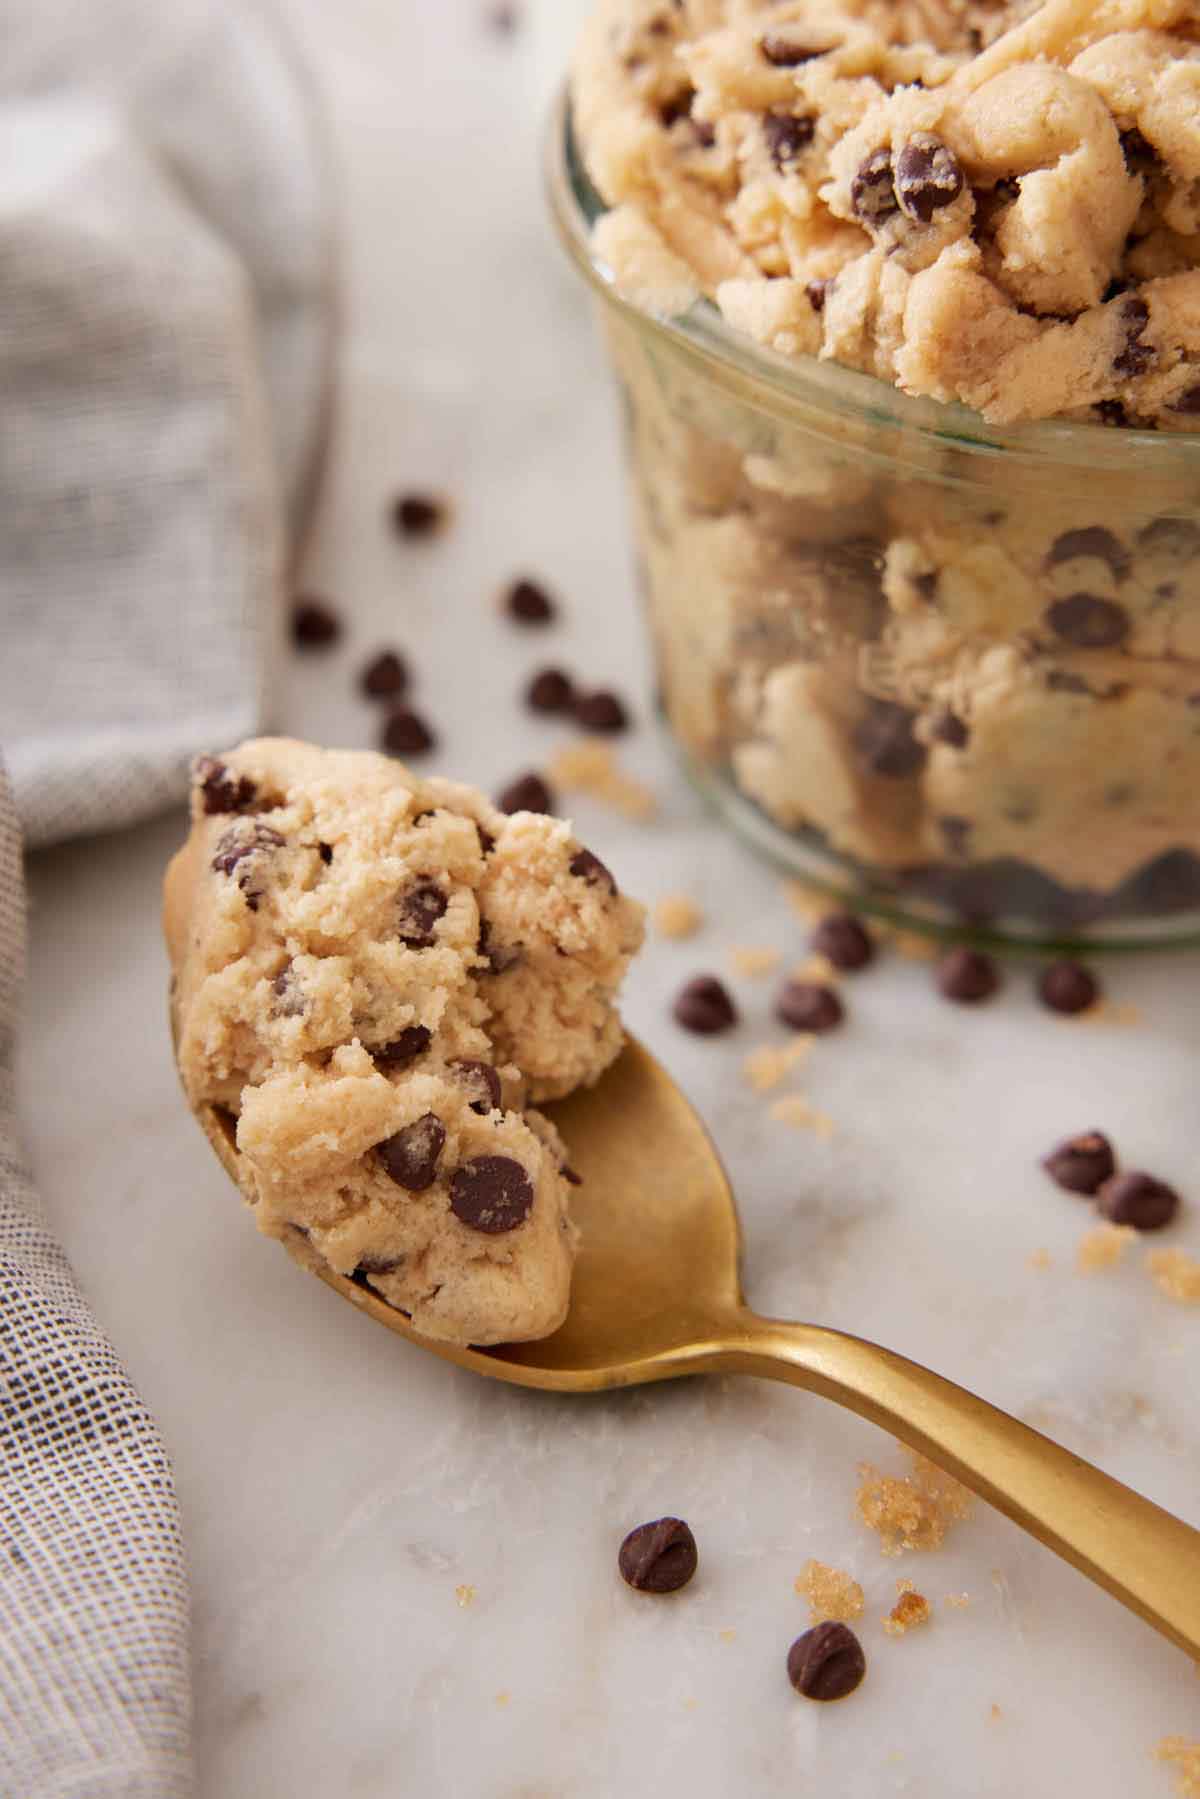 A spoonful of edible cookie dough beside a container.